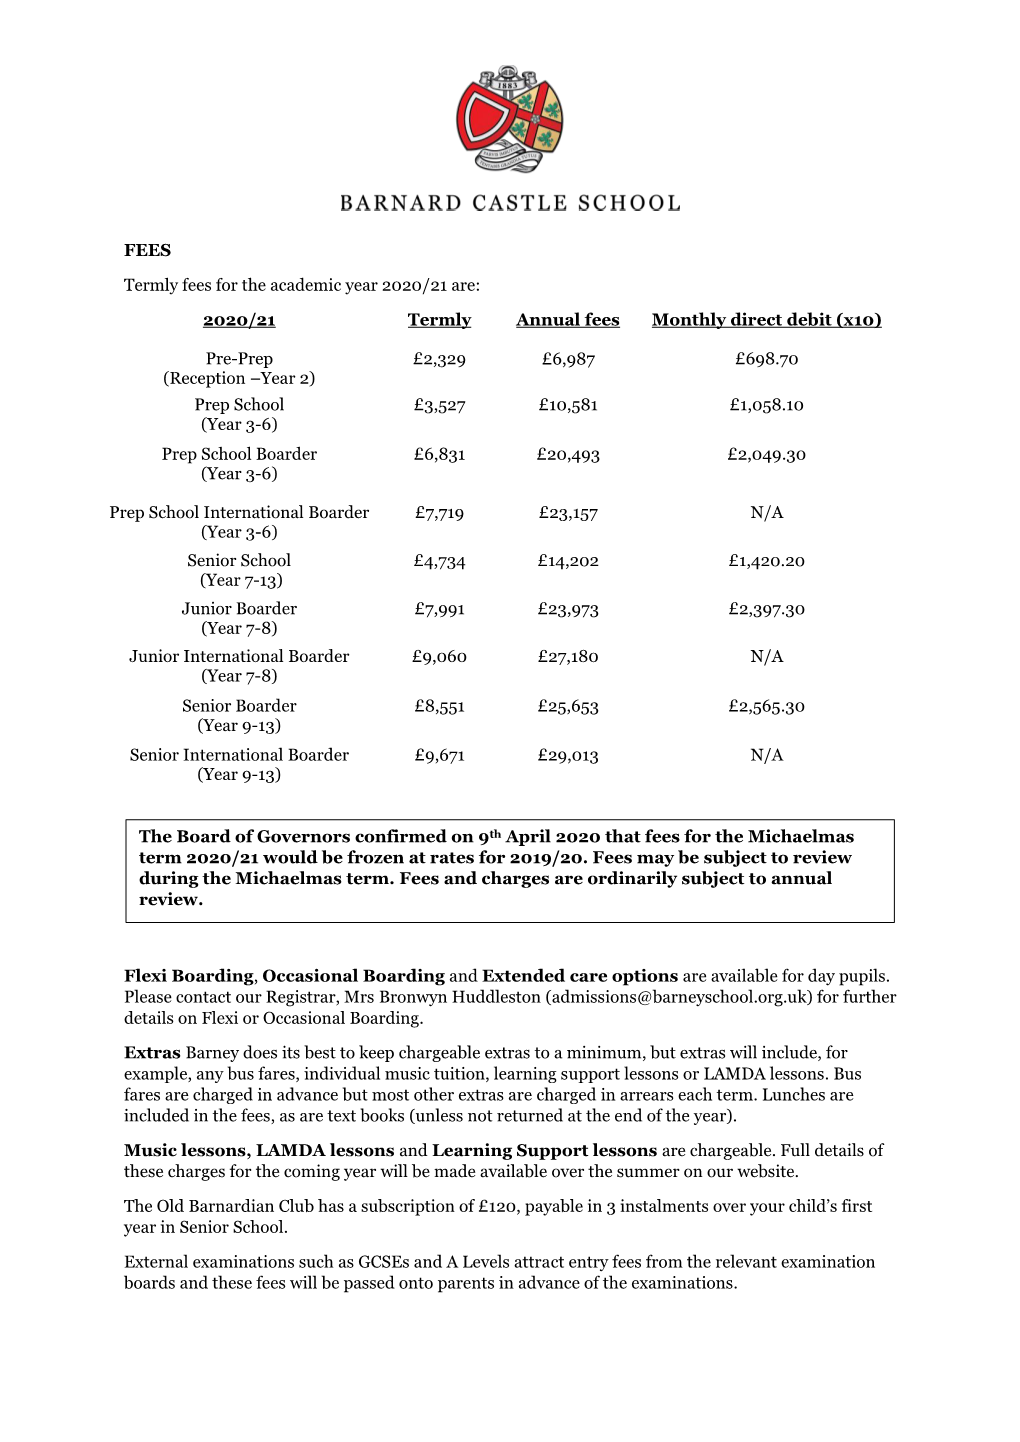 FEES Termly Fees for the Academic Year 2020/21